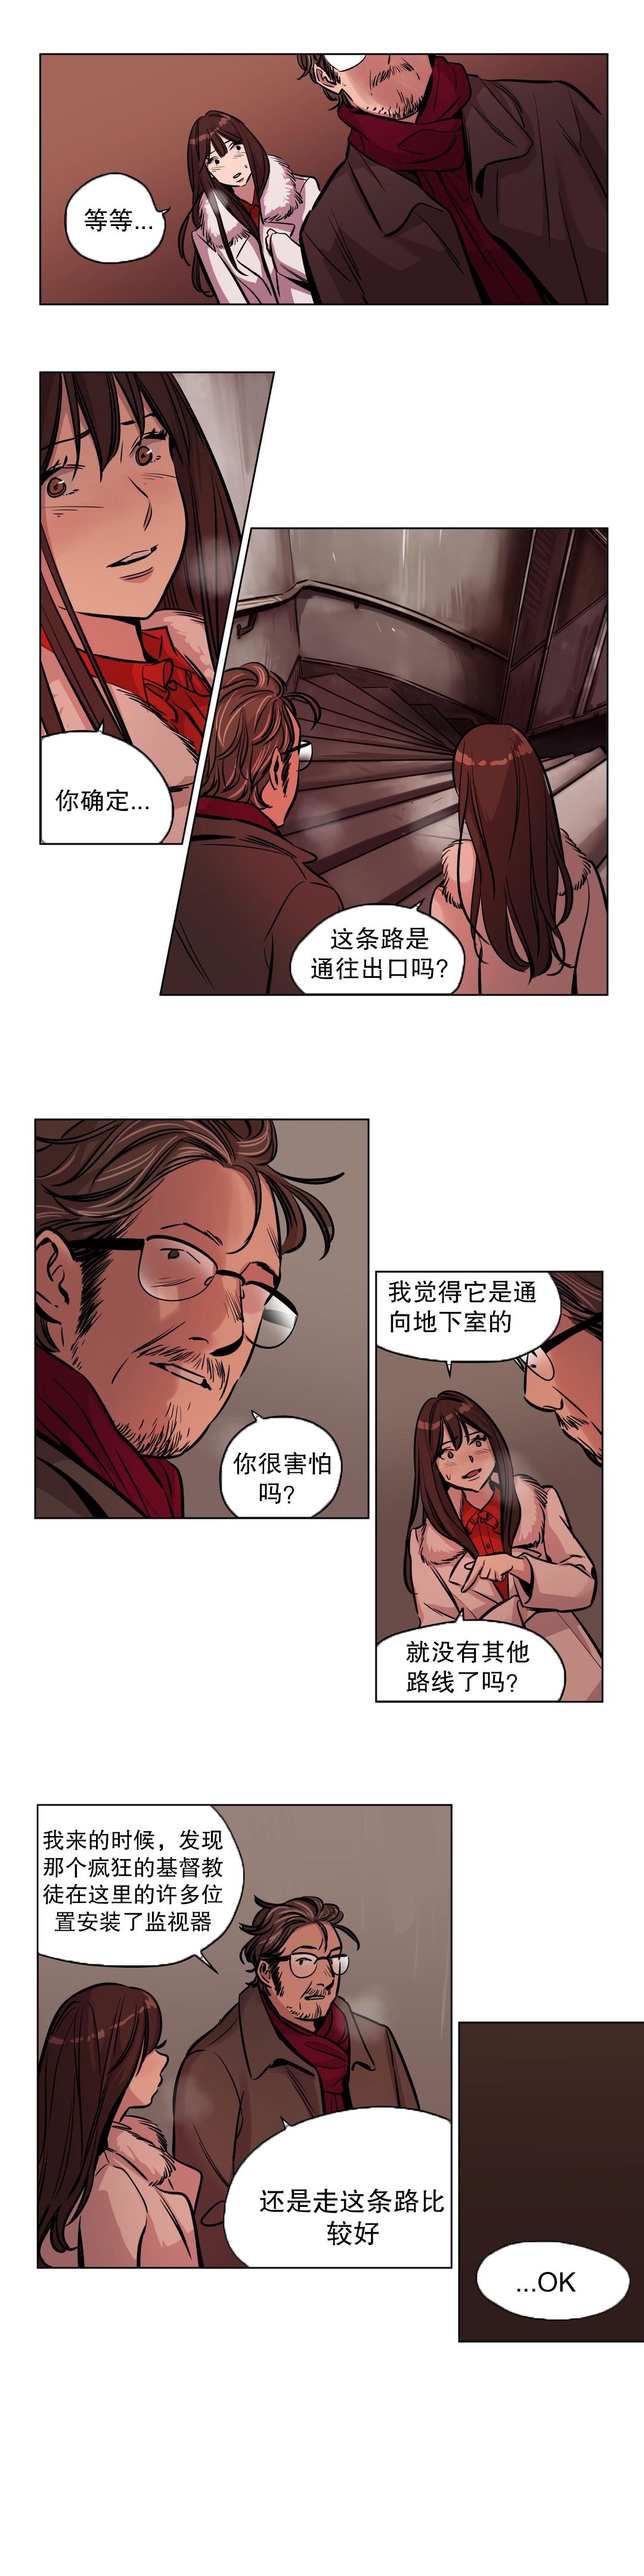 [Ramjak] 赎罪营(Atonement Camp) Ch.50-52 (Chinese) 16